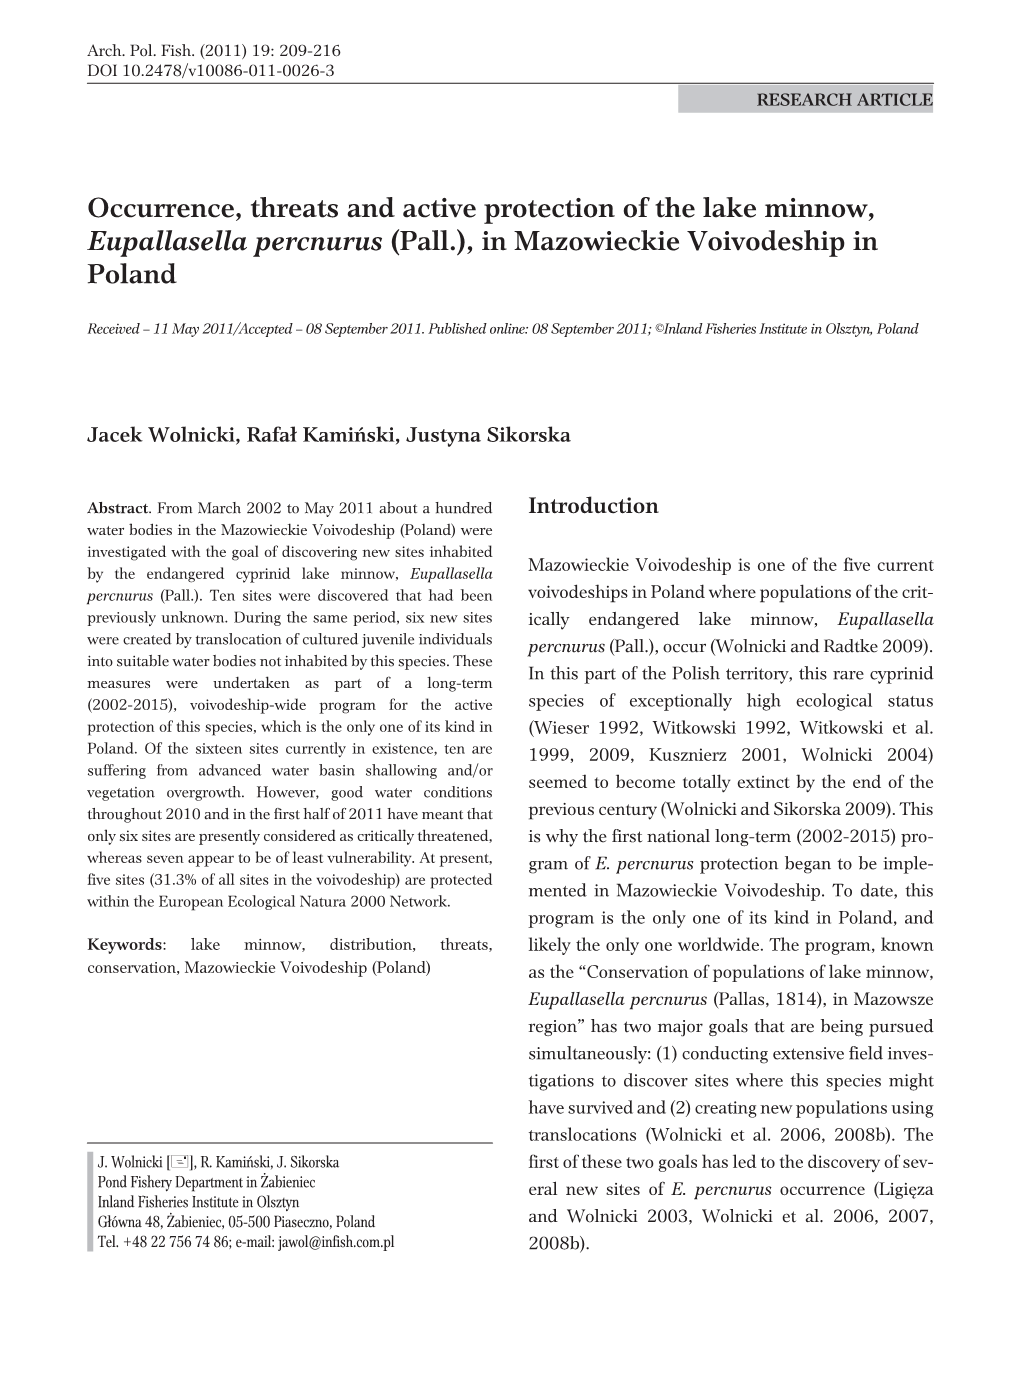 Occurrence, Threats and Active Protection of the Lake Minnow, Eupallasella Percnurus (Pall.), in Mazowieckie Voivodeship in Poland